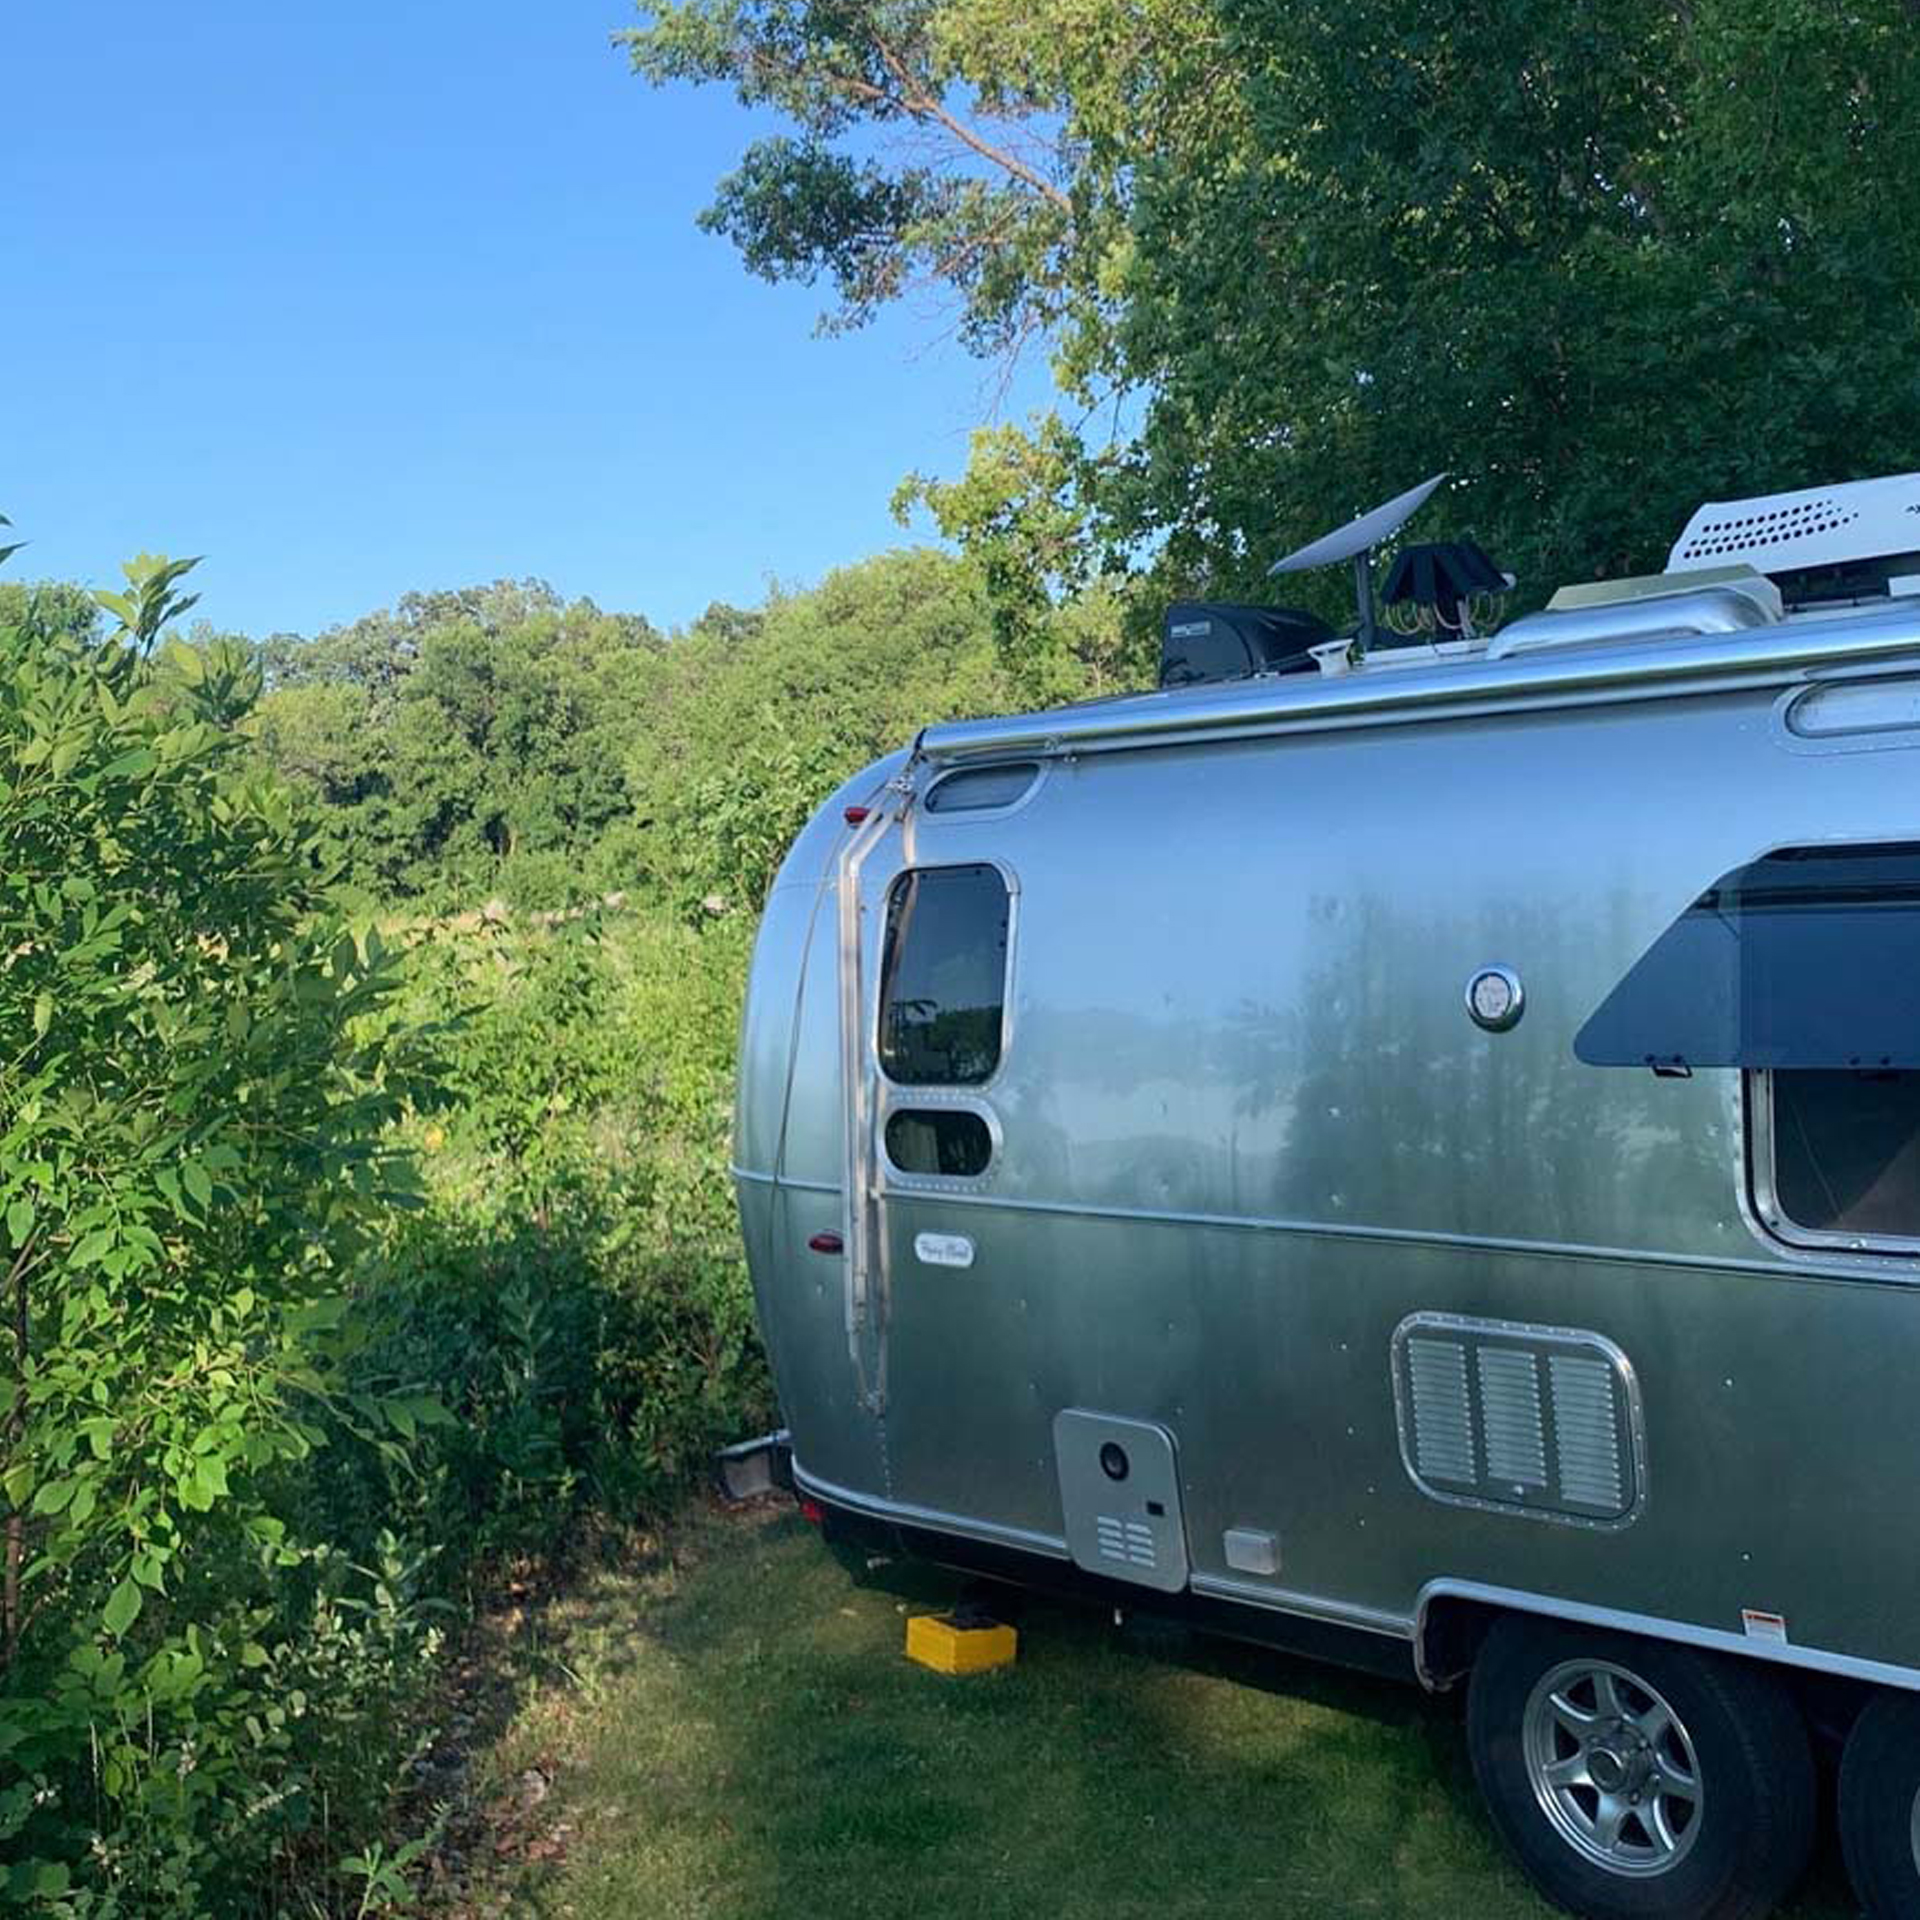 Airstream Flying Cloud camper parked at a campground with trees surrounding the trailer.